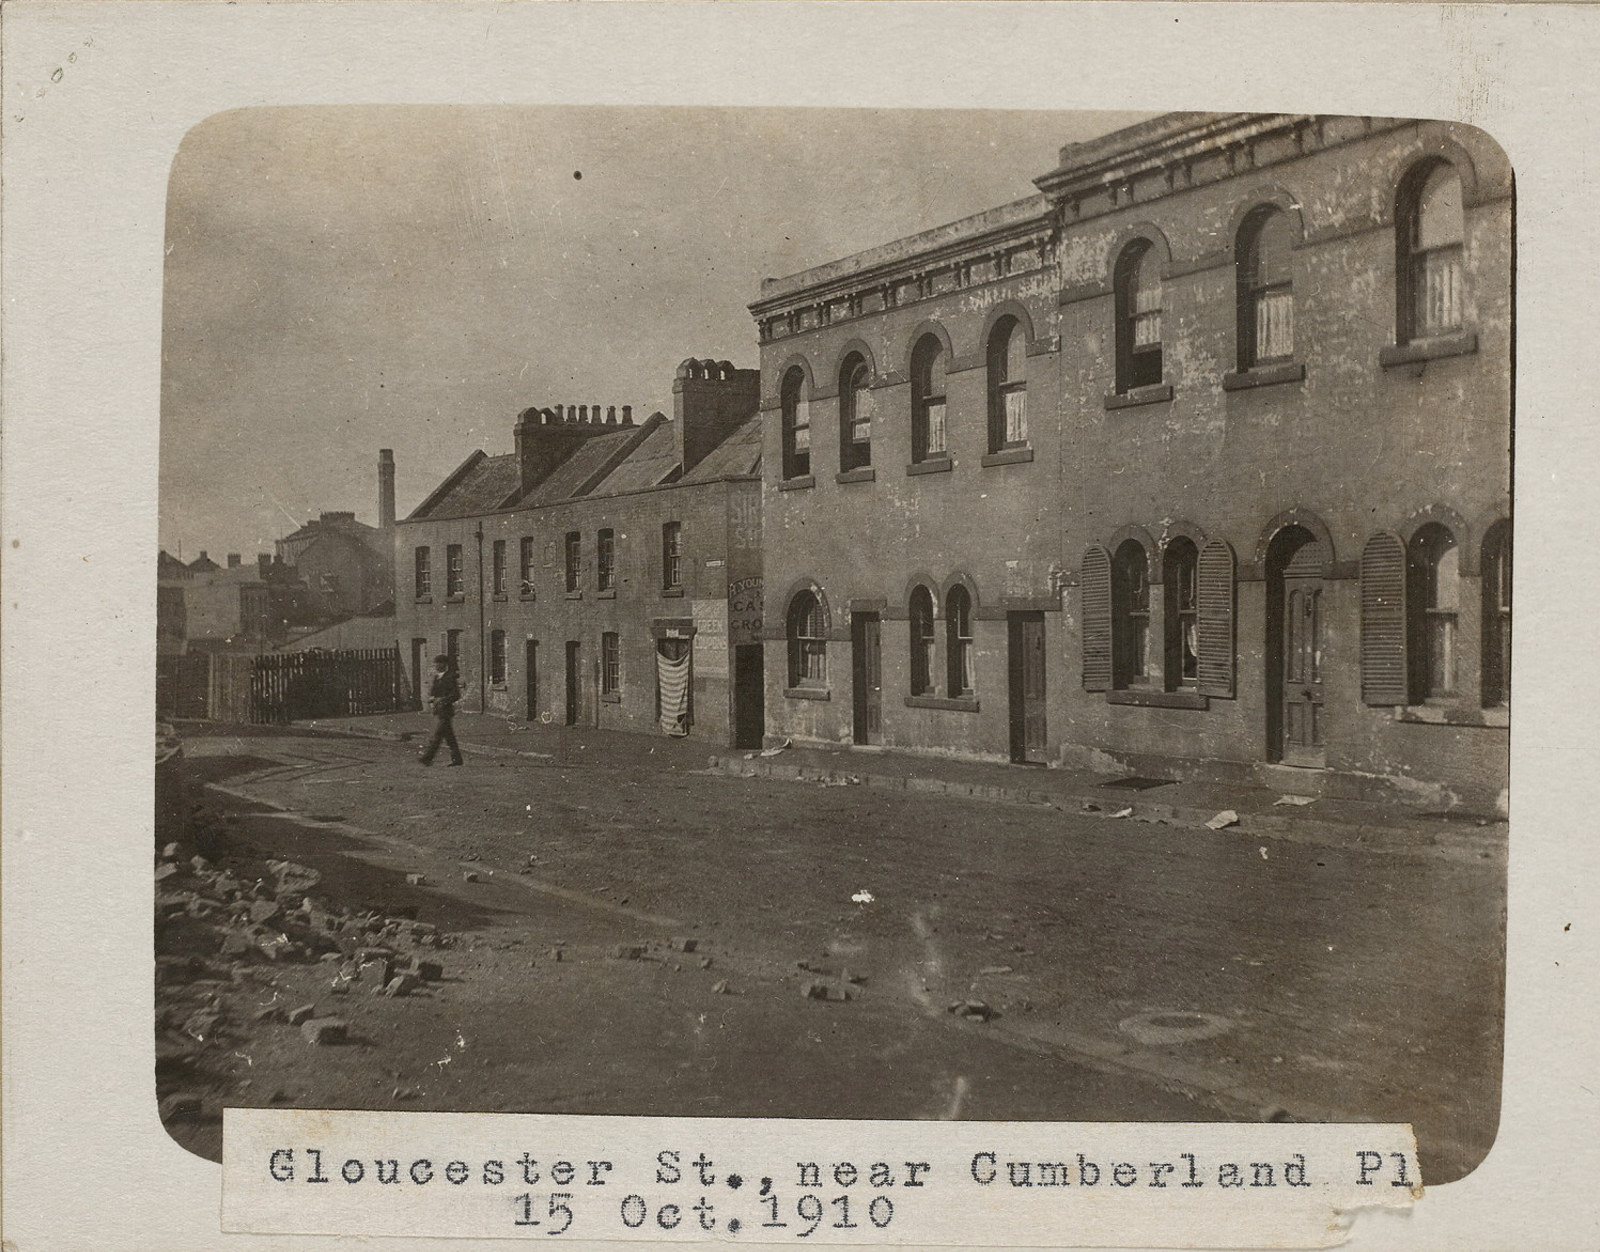 Black and white photograph of Gloucester Street showing Susannah Place terraces; The Youngein grocer shop has a stripped curtain hanging over the window.